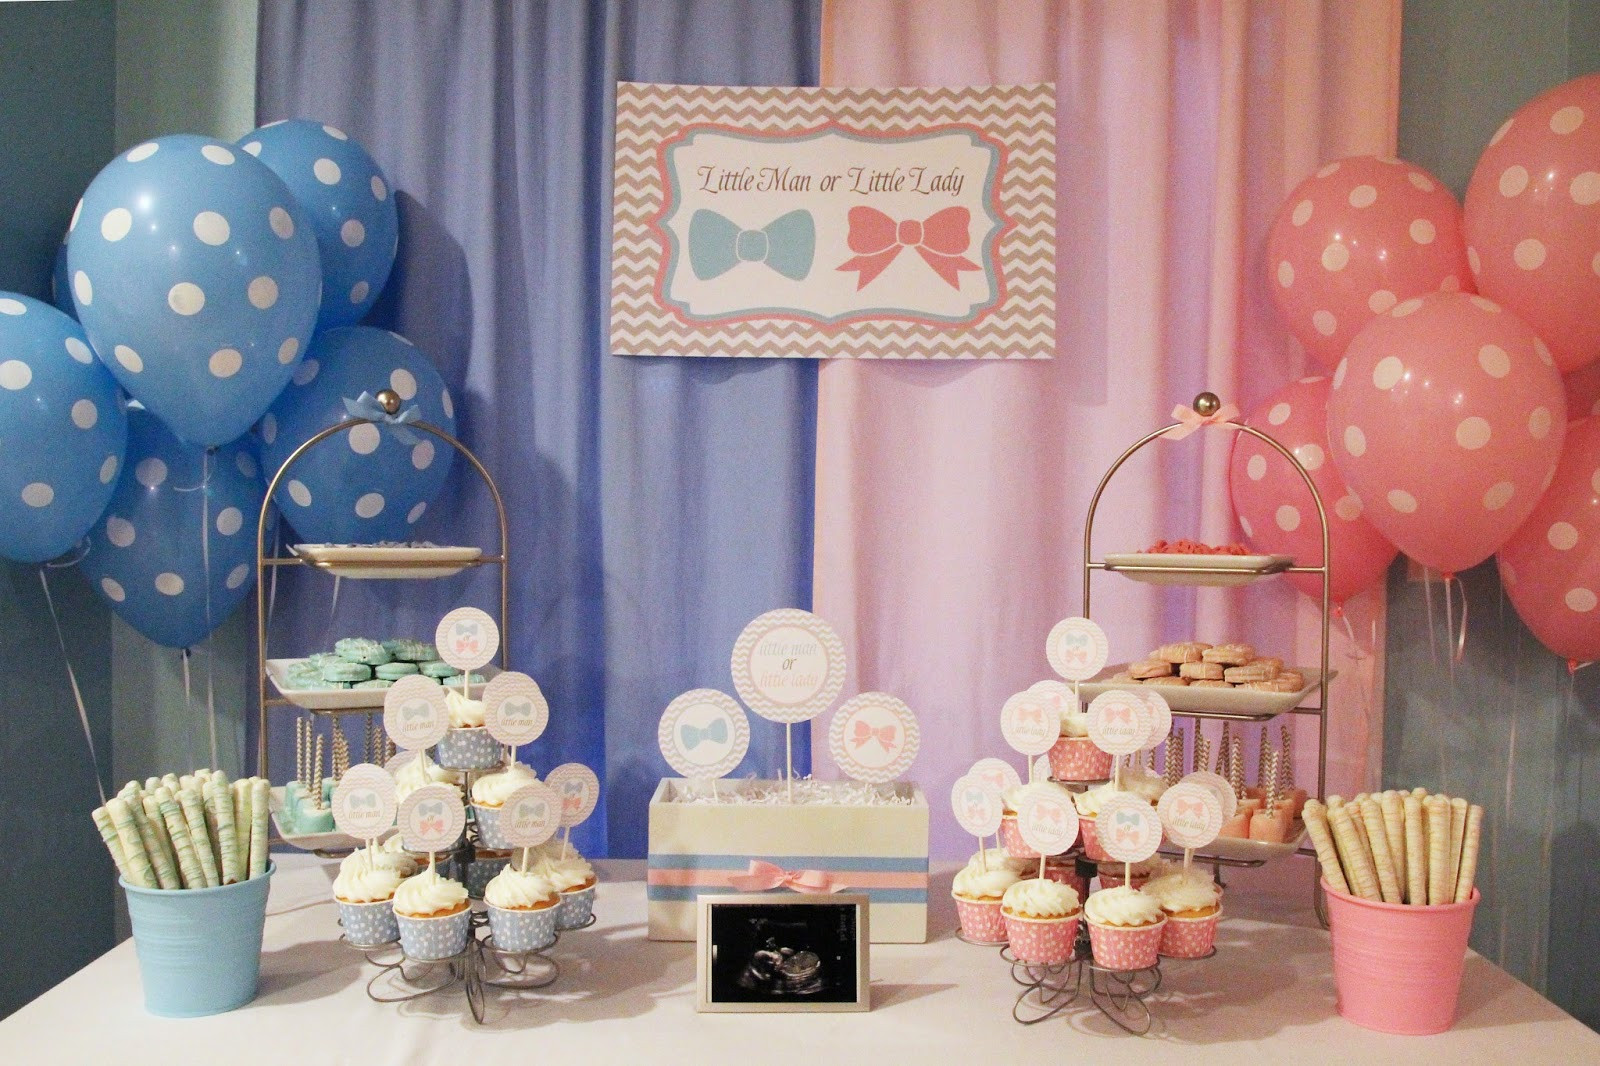 Baby Gender Reveal Decoration Ideas
 5M Creations Gender Reveal Party Little Man or Little Lady